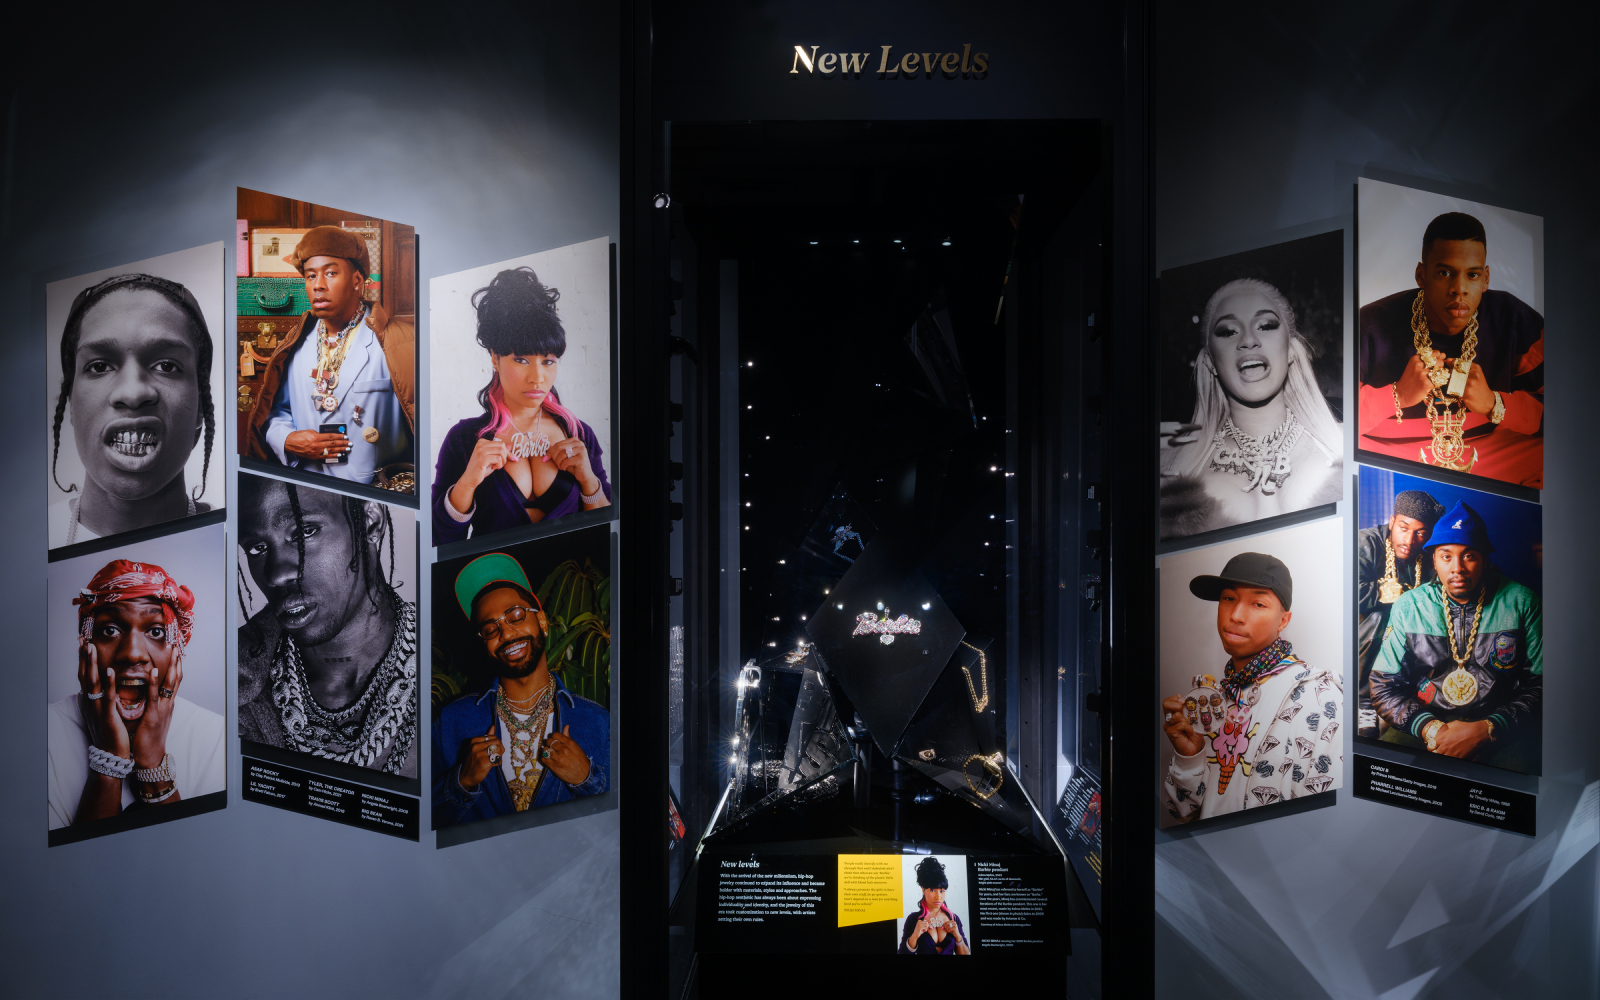 Some of the stars of the genre who appear in Ice Cold: An Exhibition of Hip-Hop Jewelry at the American Museum of Natural History